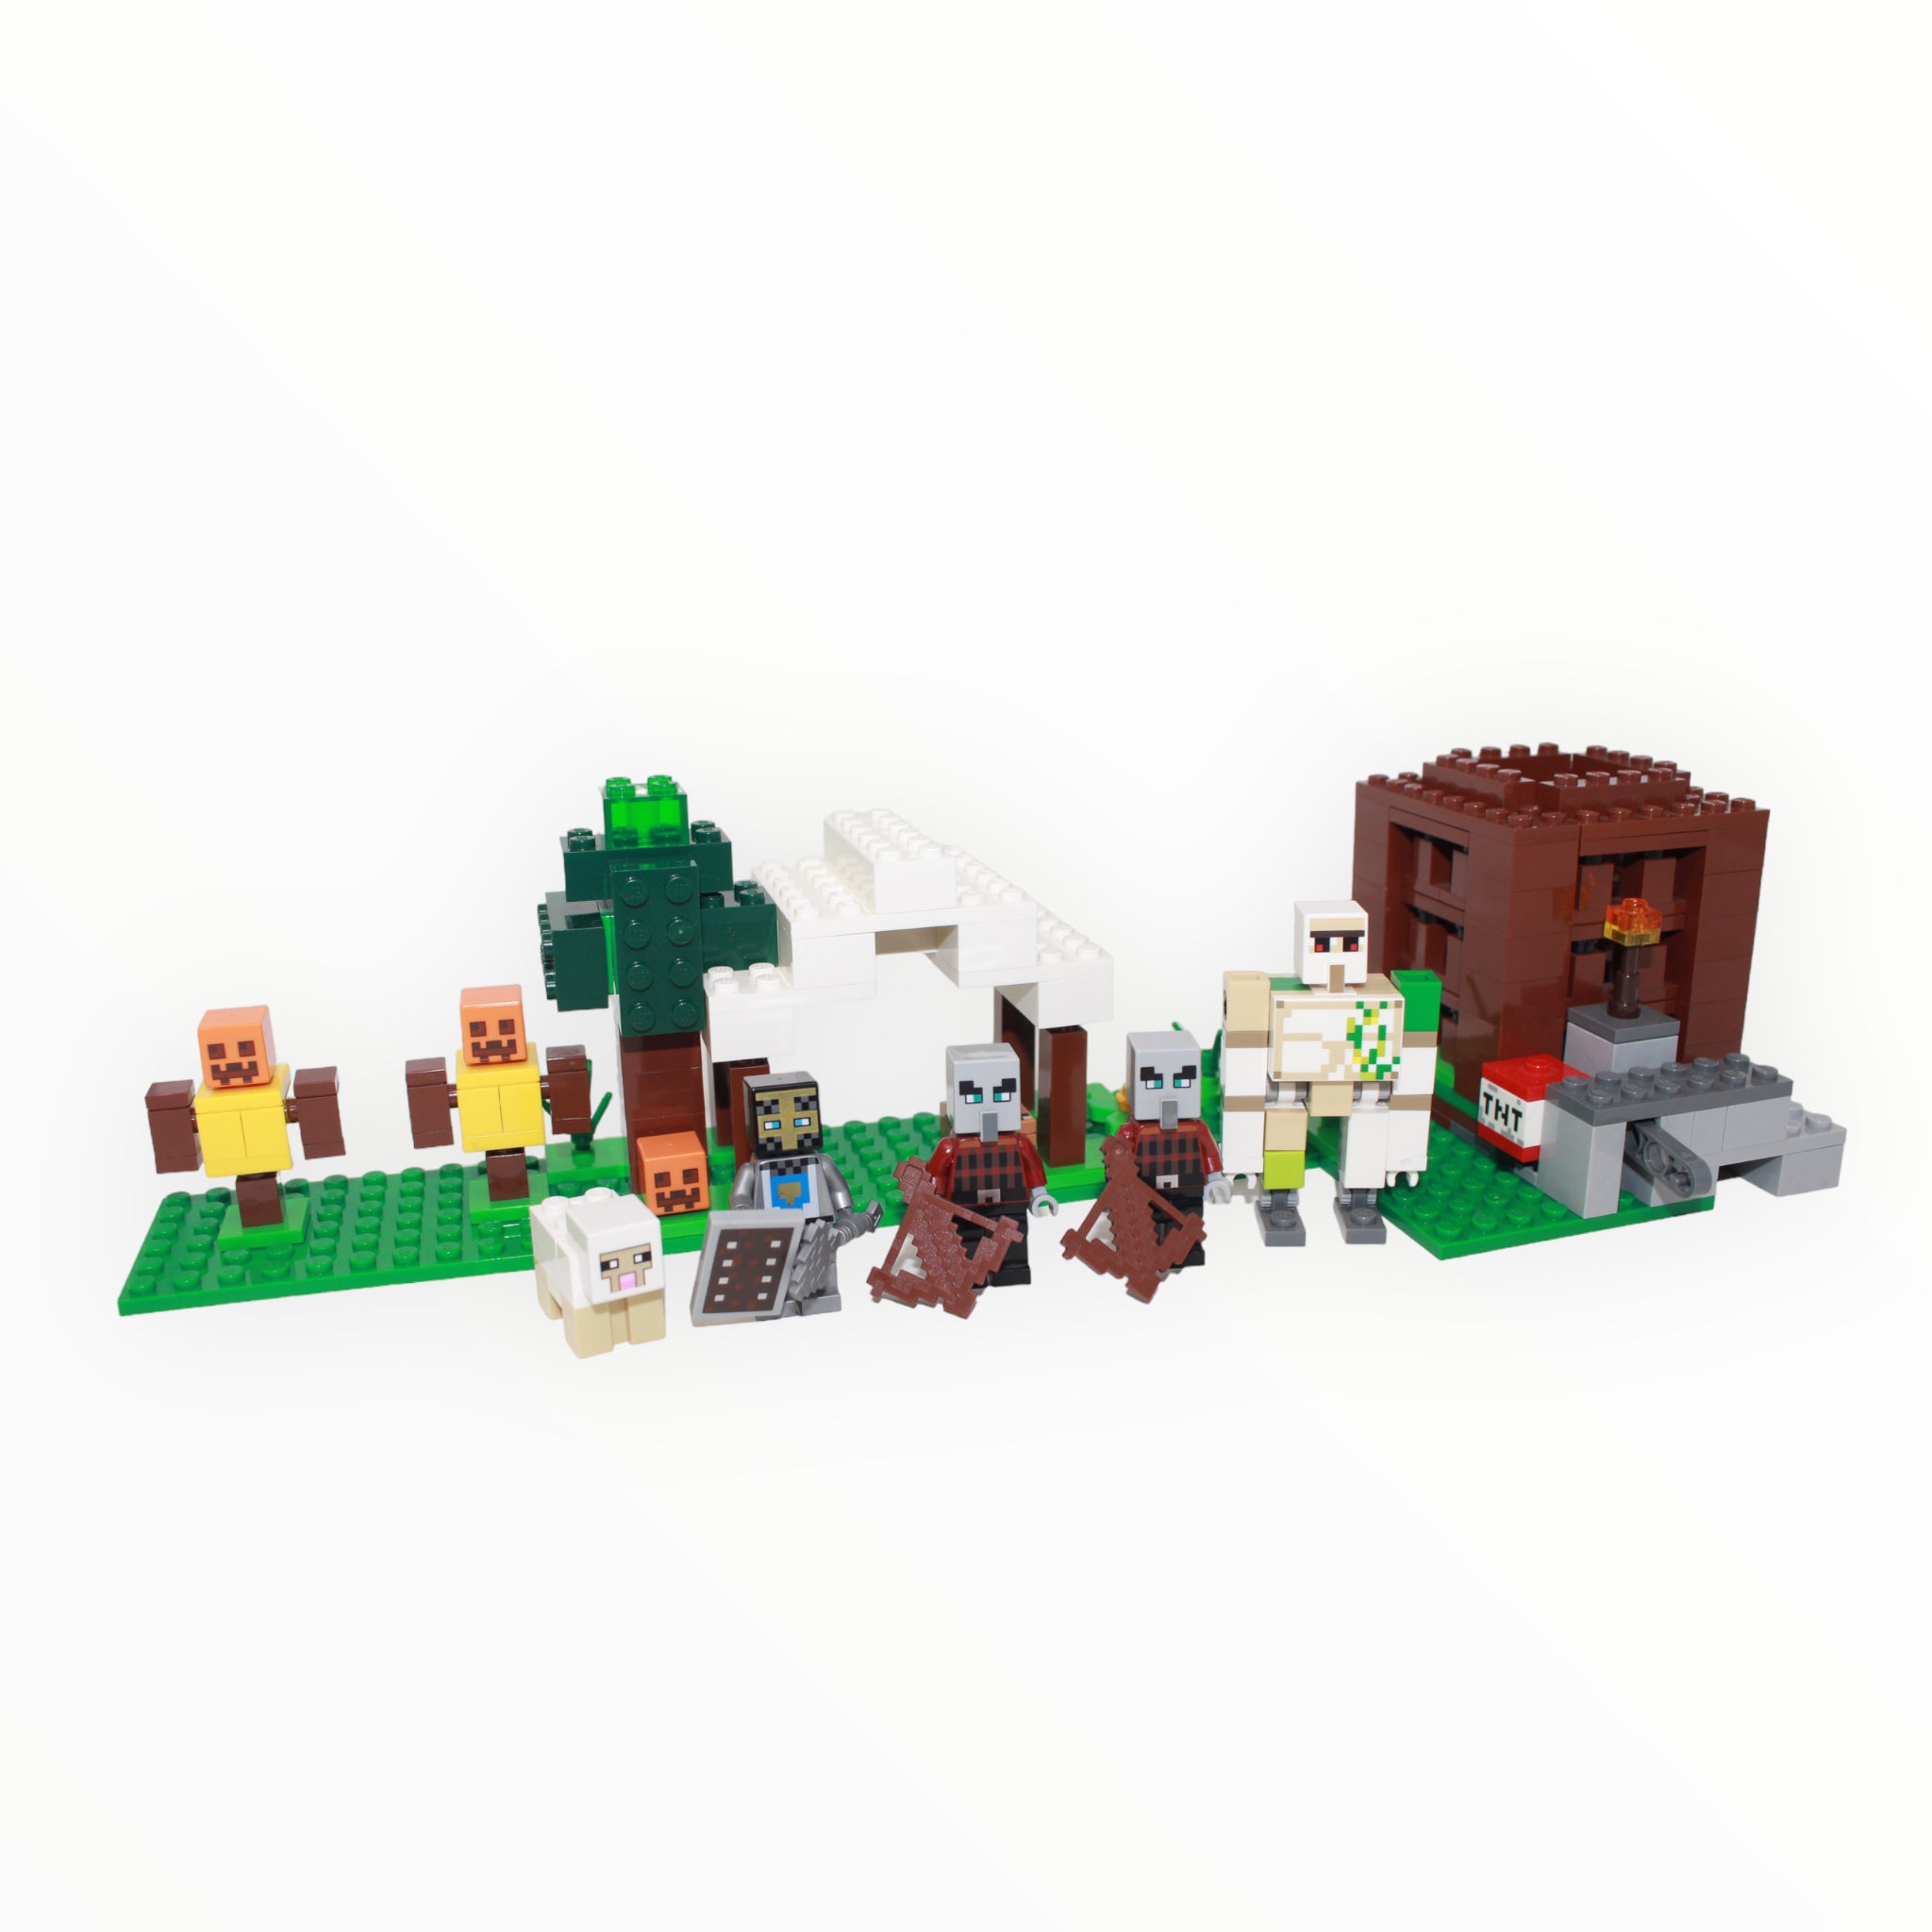 Used Set 21159 Minecraft The Pillager Outpost